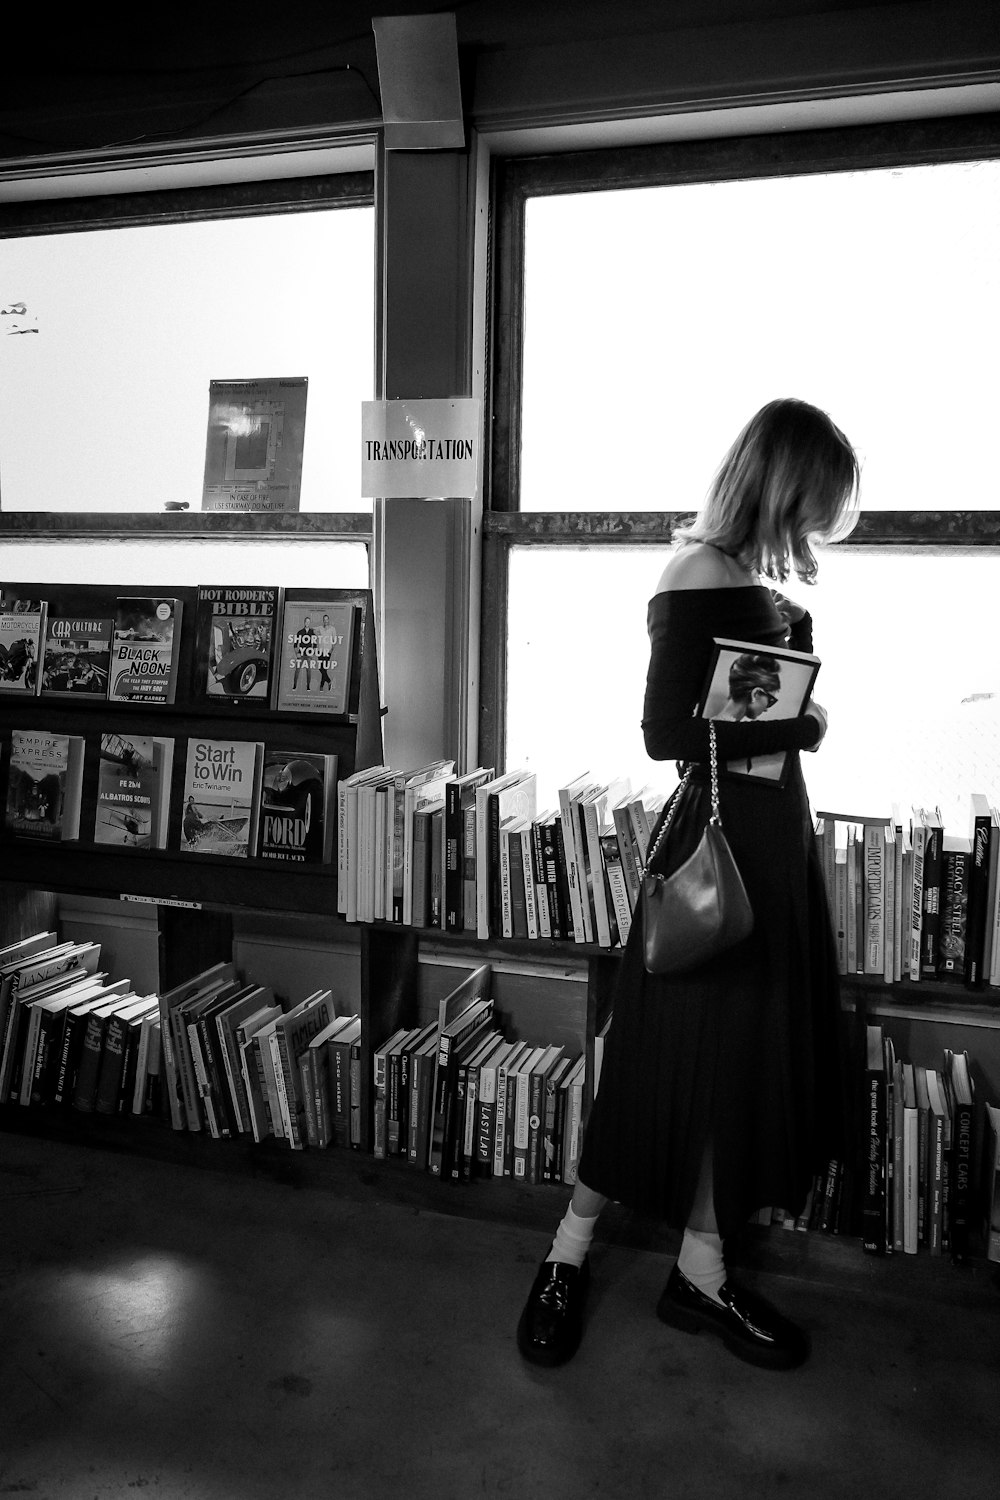 a woman standing in front of a book shelf filled with books